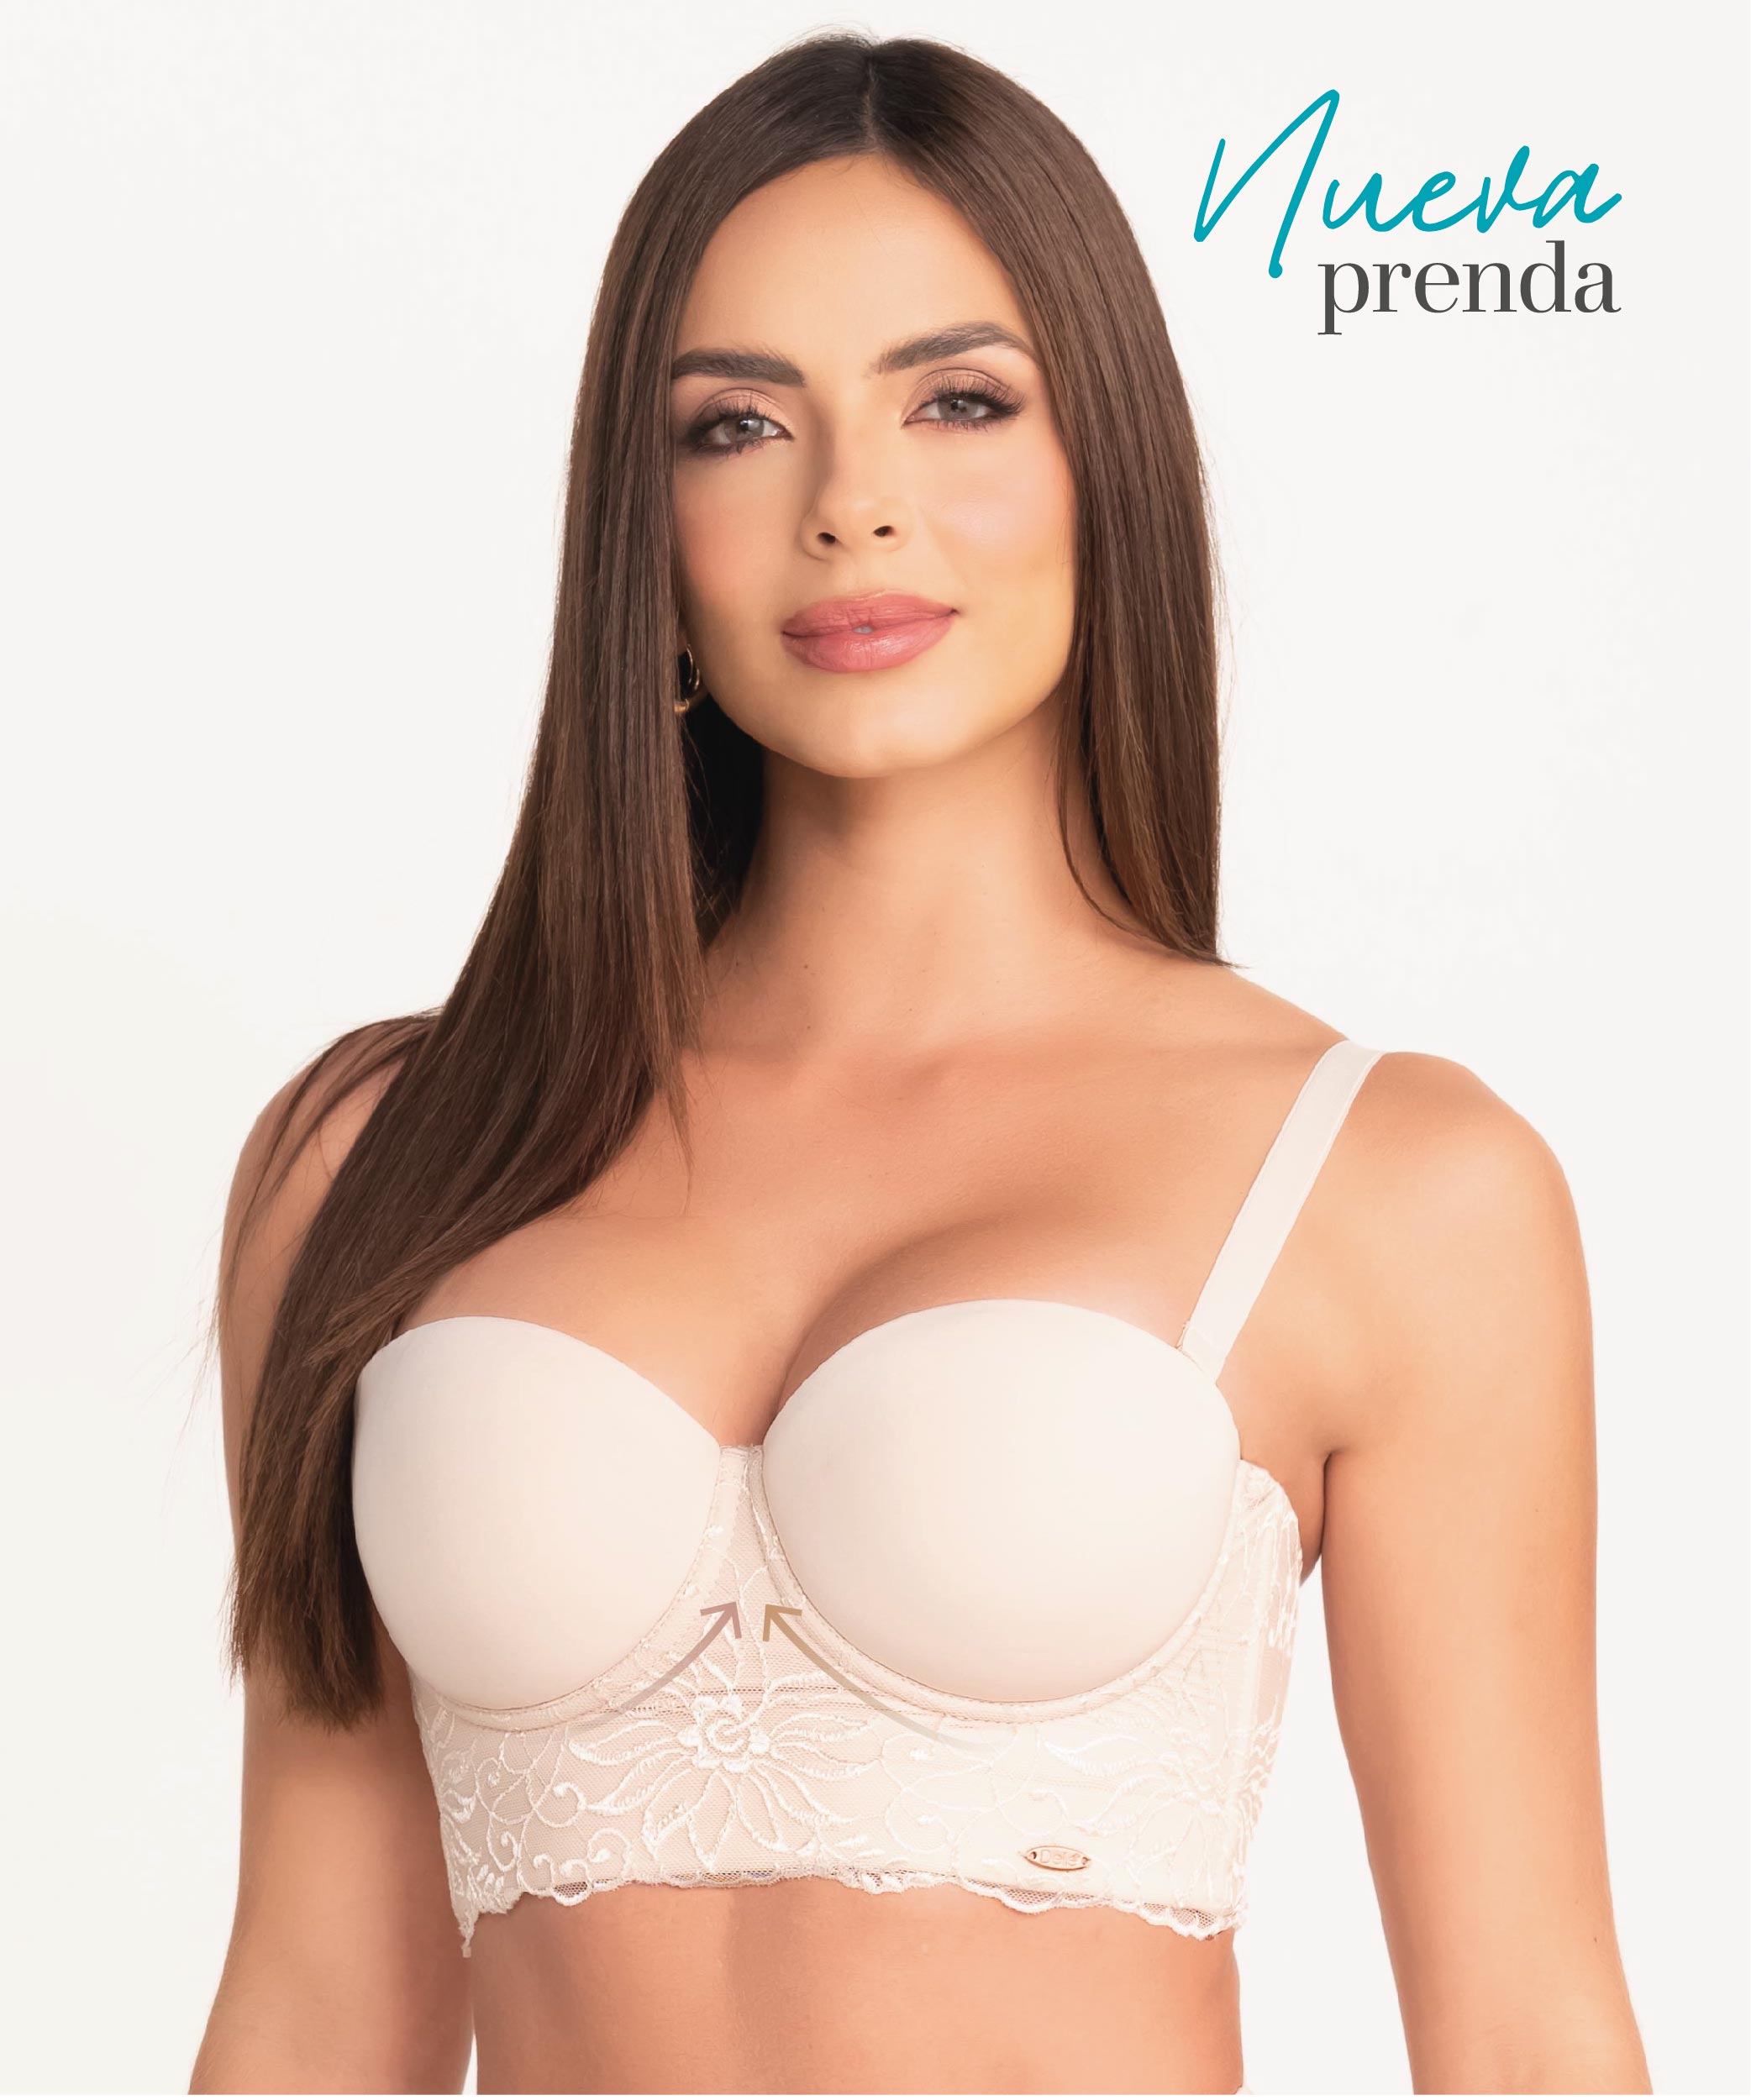 FAJAS Y BODIES, ROPA INTIMA, MUJERES